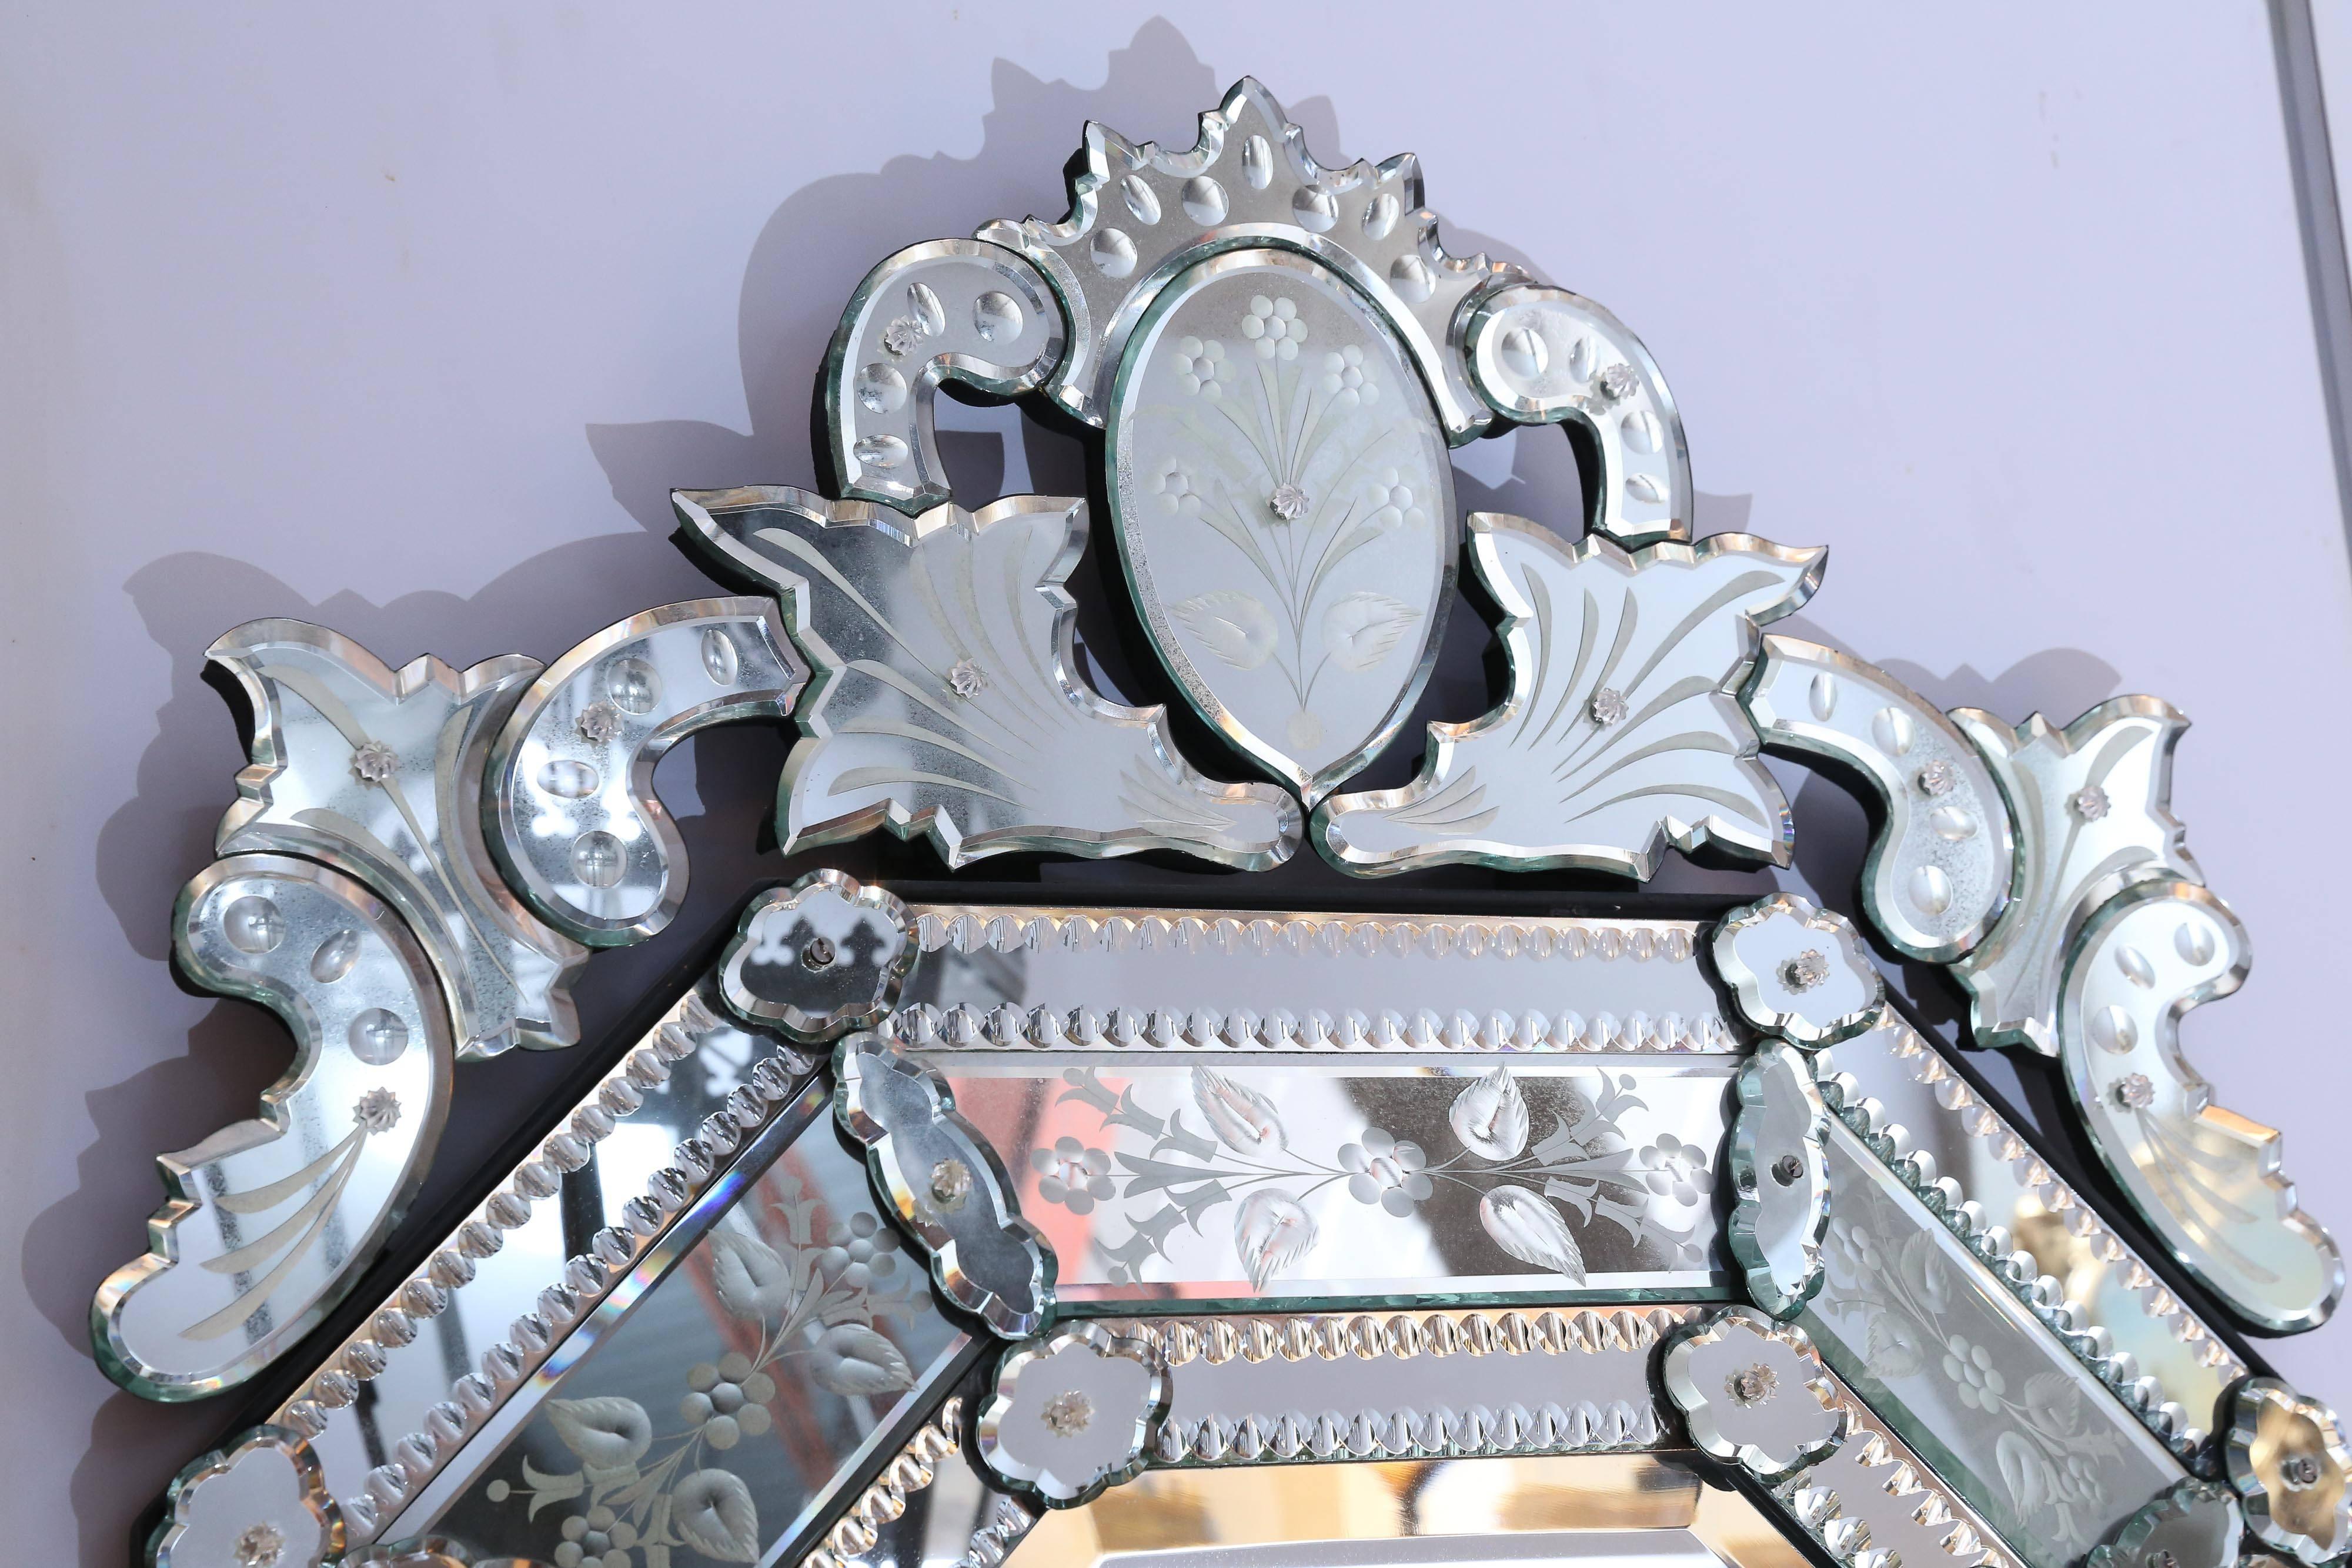 Very handsome octagonal venetian mirror with beveled and beaded panels
with rosettes. 
Etched panels surround the centre of the mirror.
Multi-piece cartouche crowns the top finishes the mirror very elegantly.
Inside mirror is 22